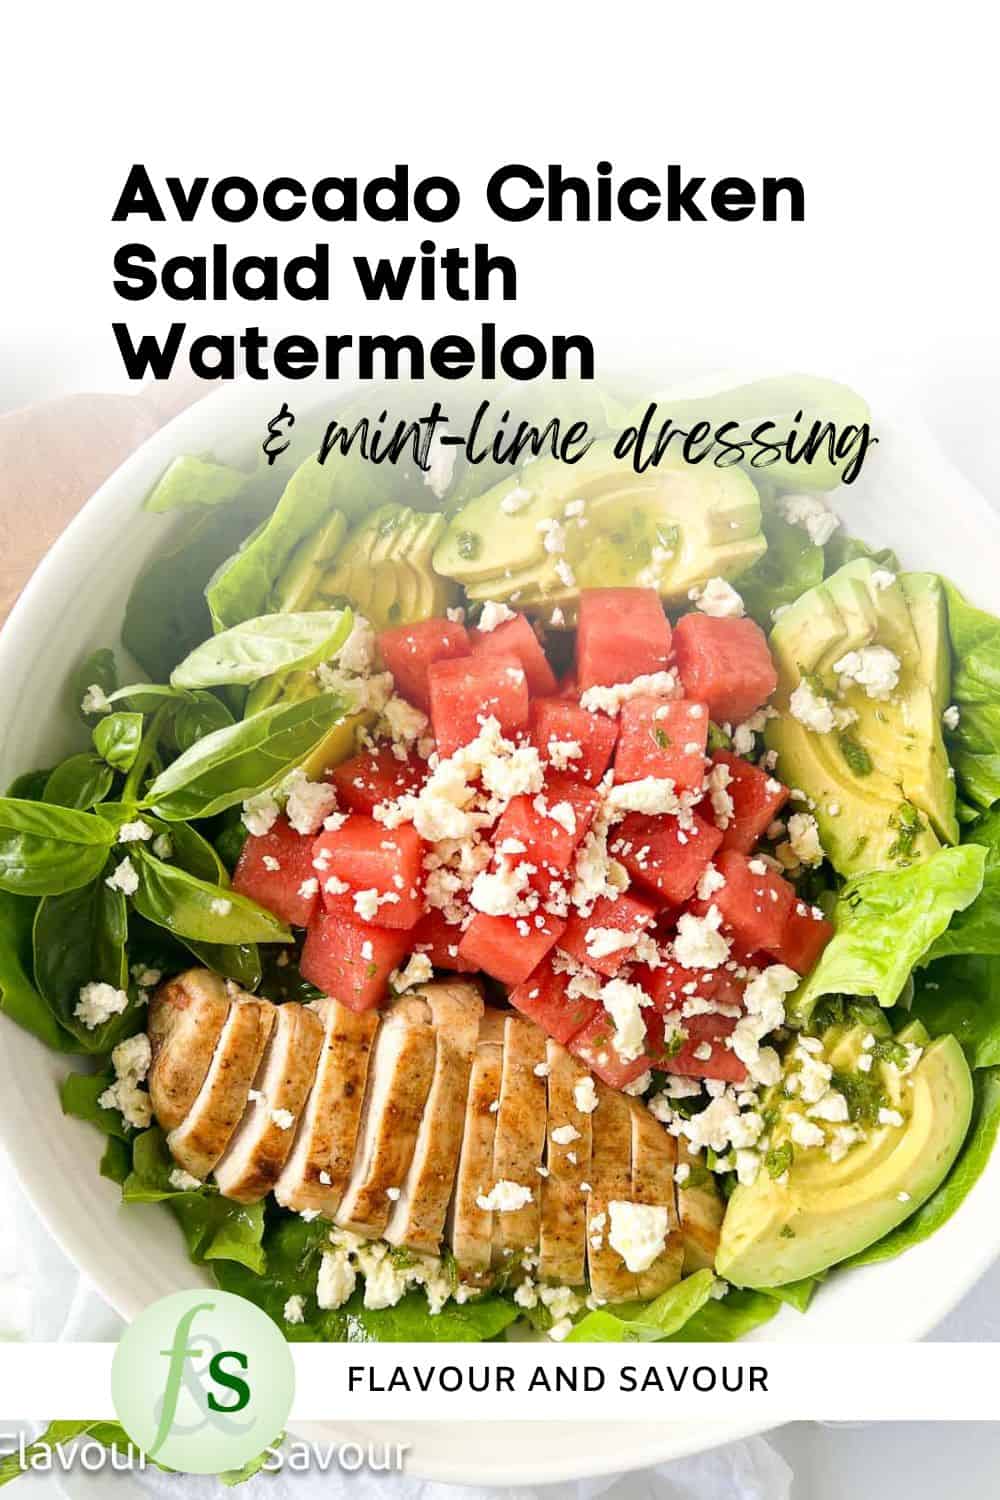 Image with text overlay for Avocado Chicken Salad with Watermelon and Mint-Lime Vinaigrette.